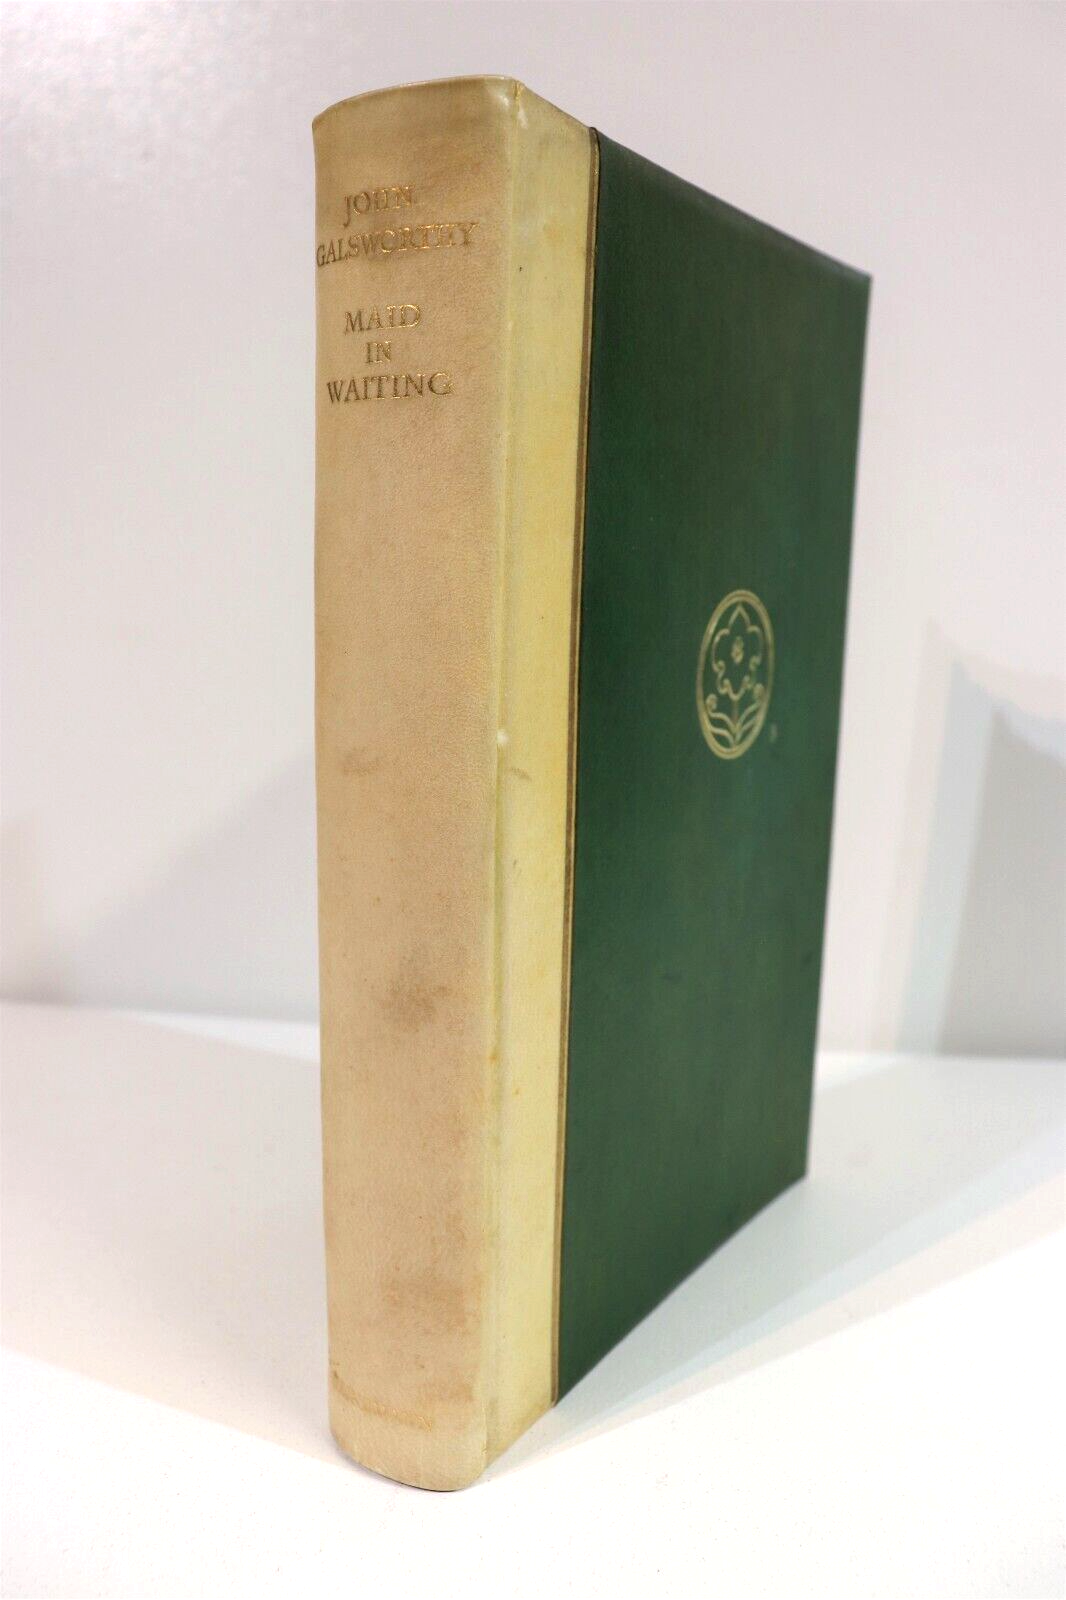 Maid In Waiting by John Galsworthy - 1931 - Ltd Ed. Signed by Author Book